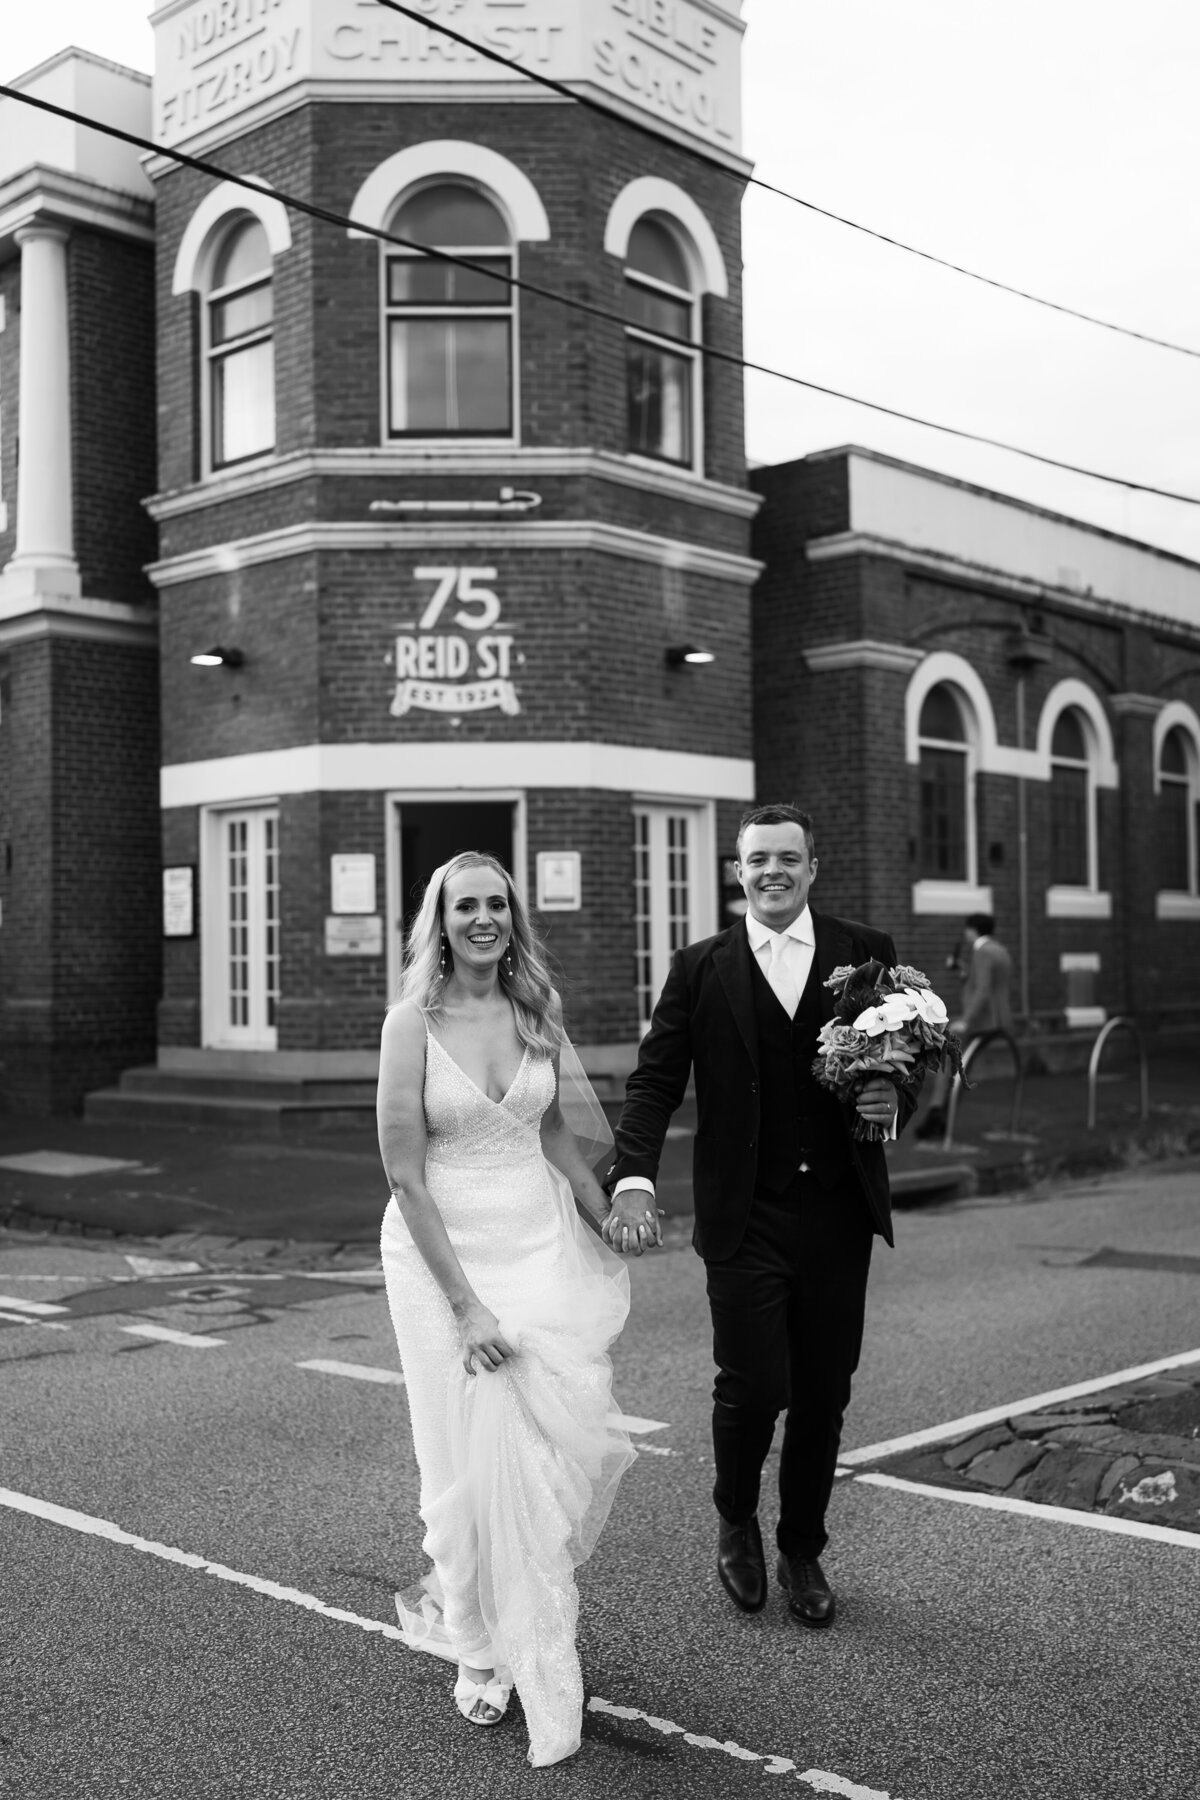 Courtney Laura Photography, Melbourne Wedding Photographer, Fitzroy Nth, 75 Reid St, Cath and Mitch-678